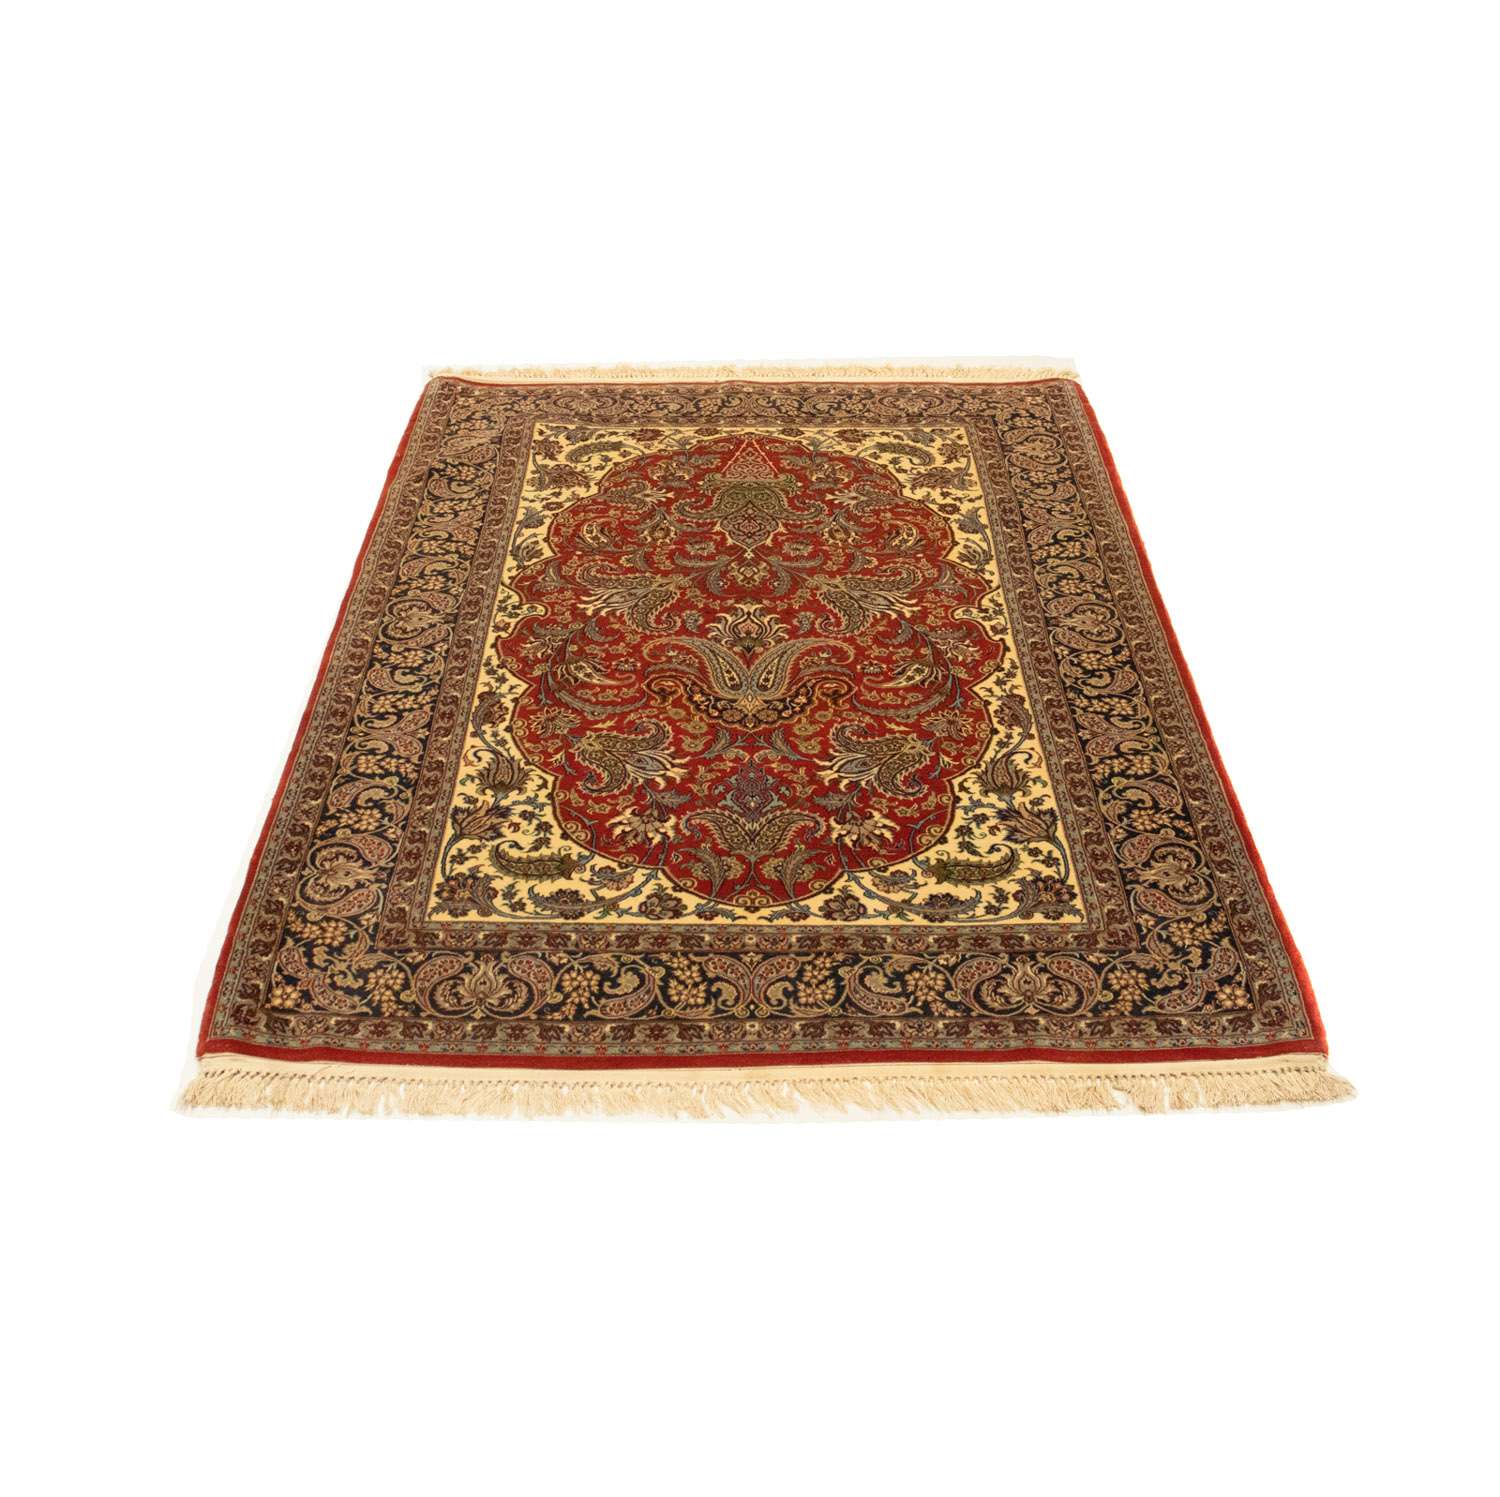 Perser Rug - Isfahan - Premium - 171 x 111 cm - red